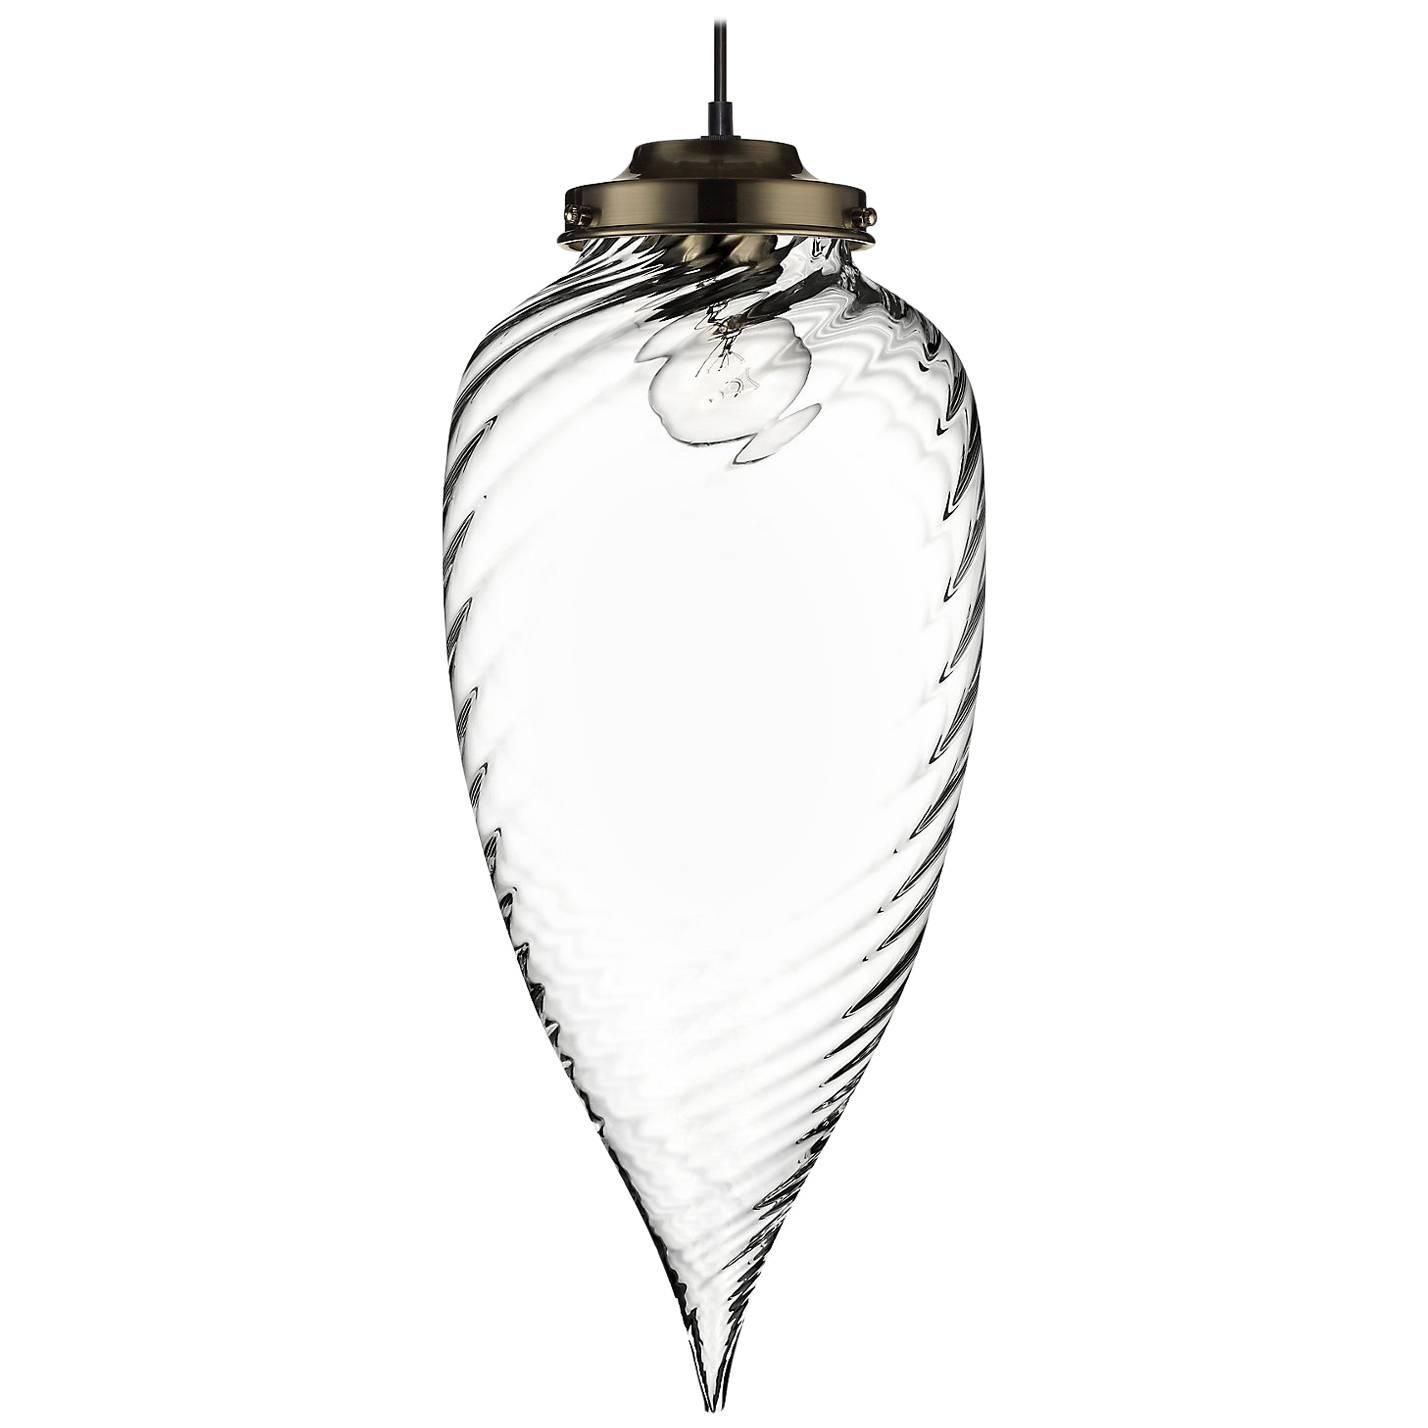 Cascade Chandeliers – 409 For Sale On 1stdibs With Regard To Carmen 8 Light Lantern Tiered Pendants (View 29 of 30)